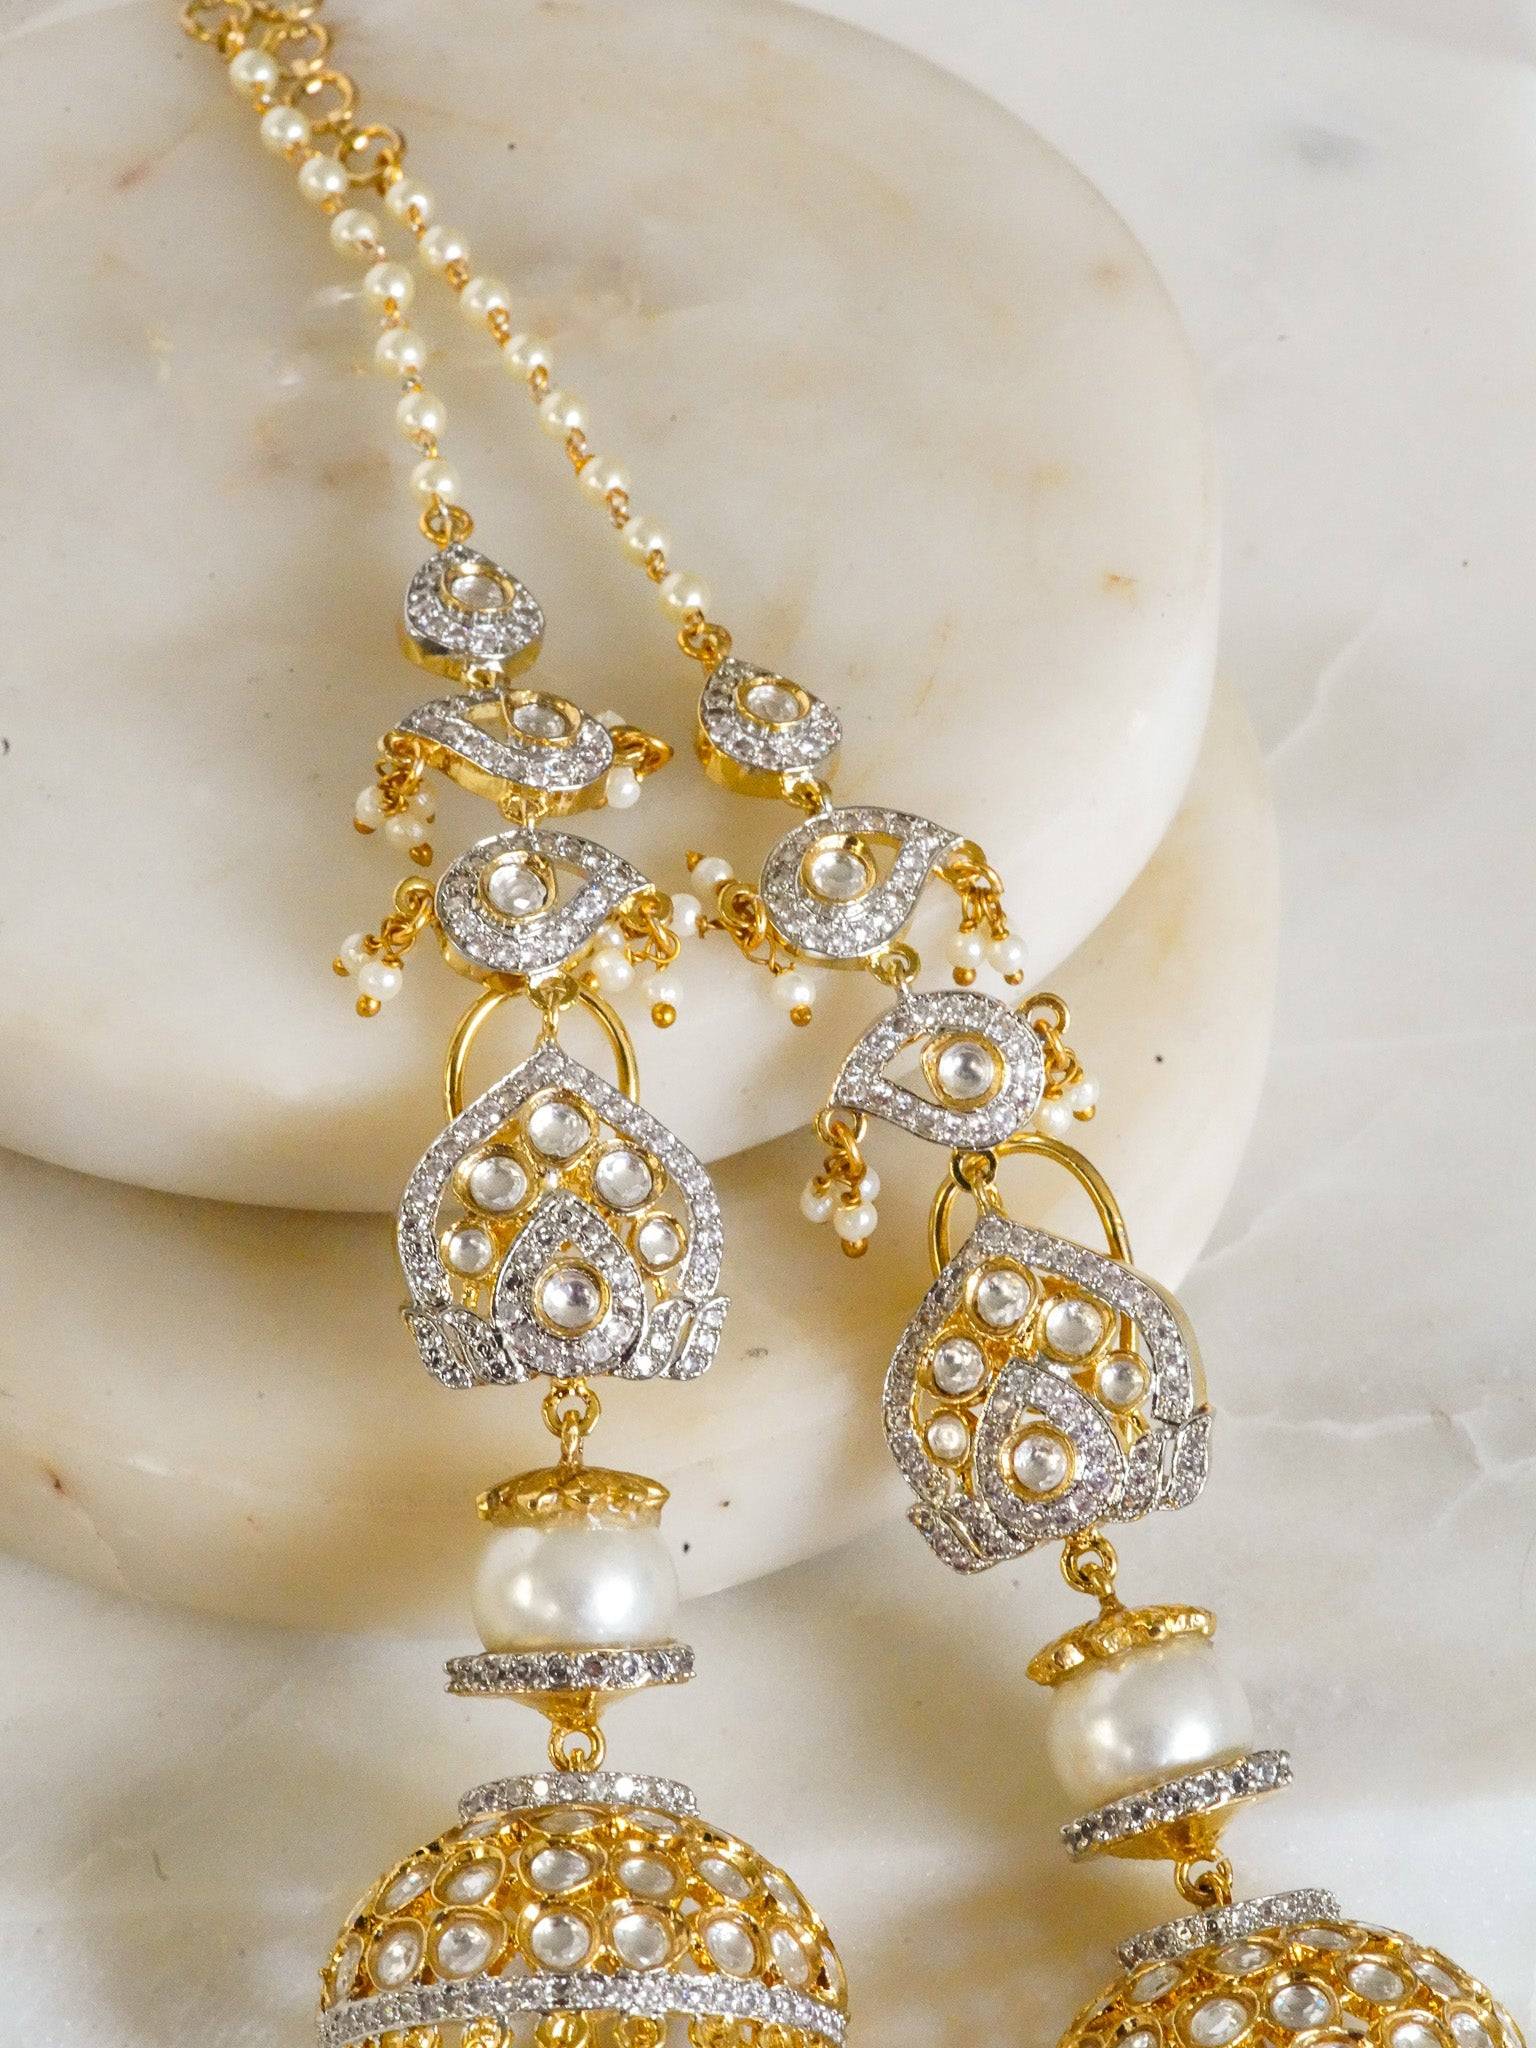 Aniva earrings with Moissanite Polki stones, white diamante accents, and dangling faux pearls, featuring multiple layers and attached pearl earring chains for added allure.